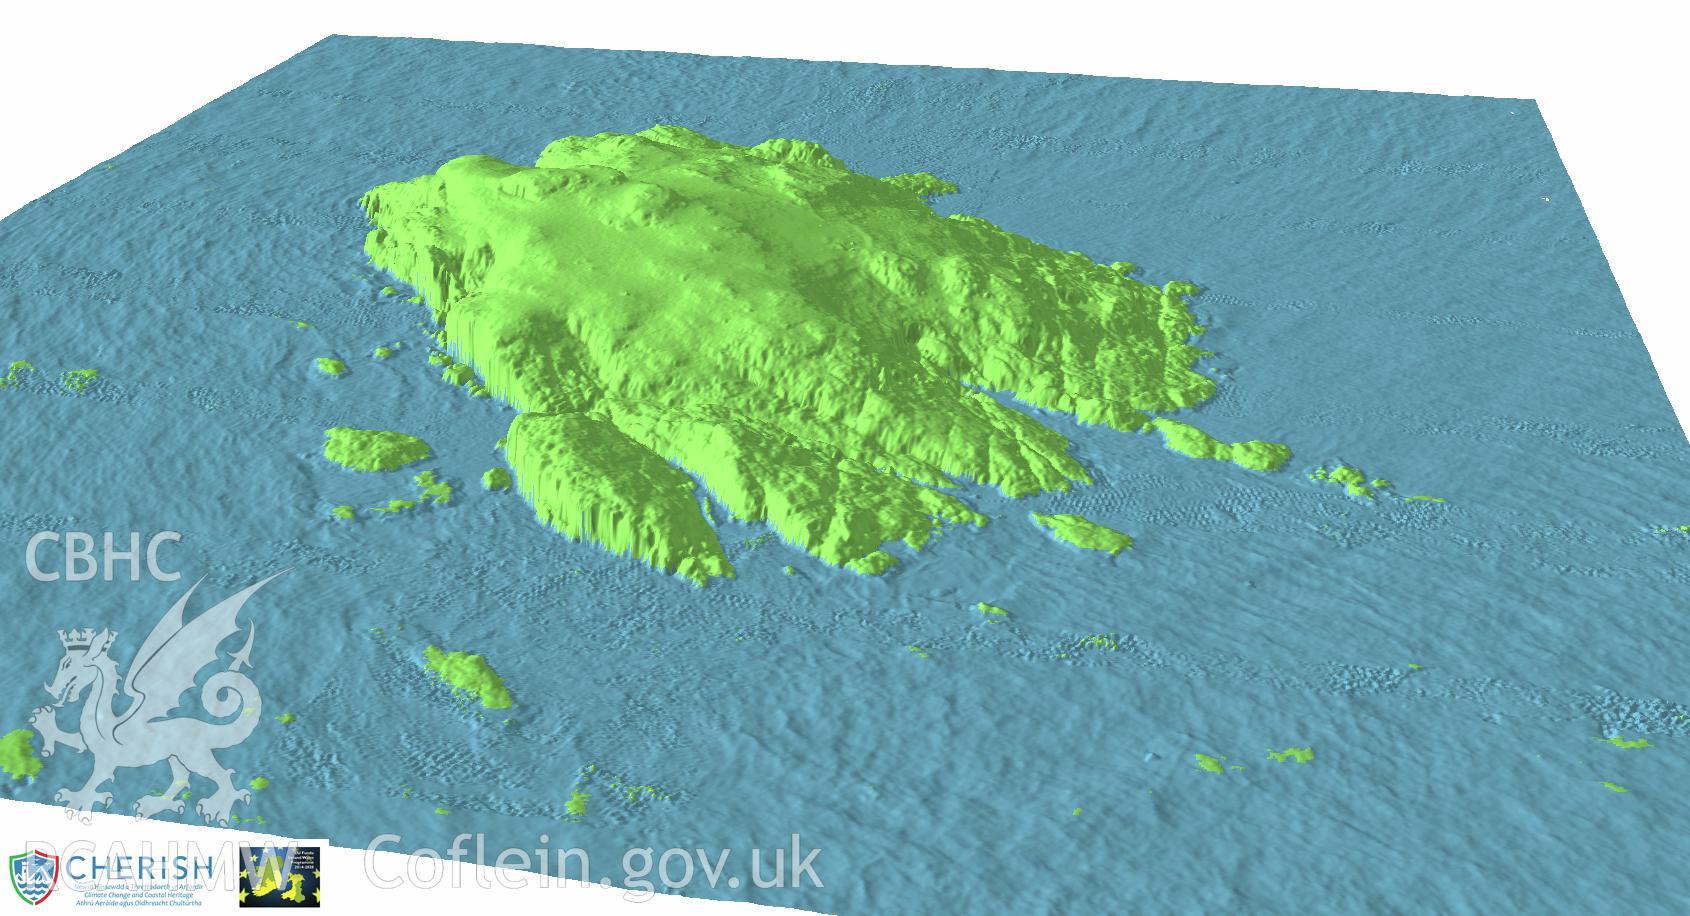 Ynys Gwales (Grassholm Island). Airborne laser scanning (LiDAR) commissioned by the CHERISH Project 2017-2021, flown by Bluesky International LTD at low tide on 24th February 2017. View showing Grassholm Island facing north-east.